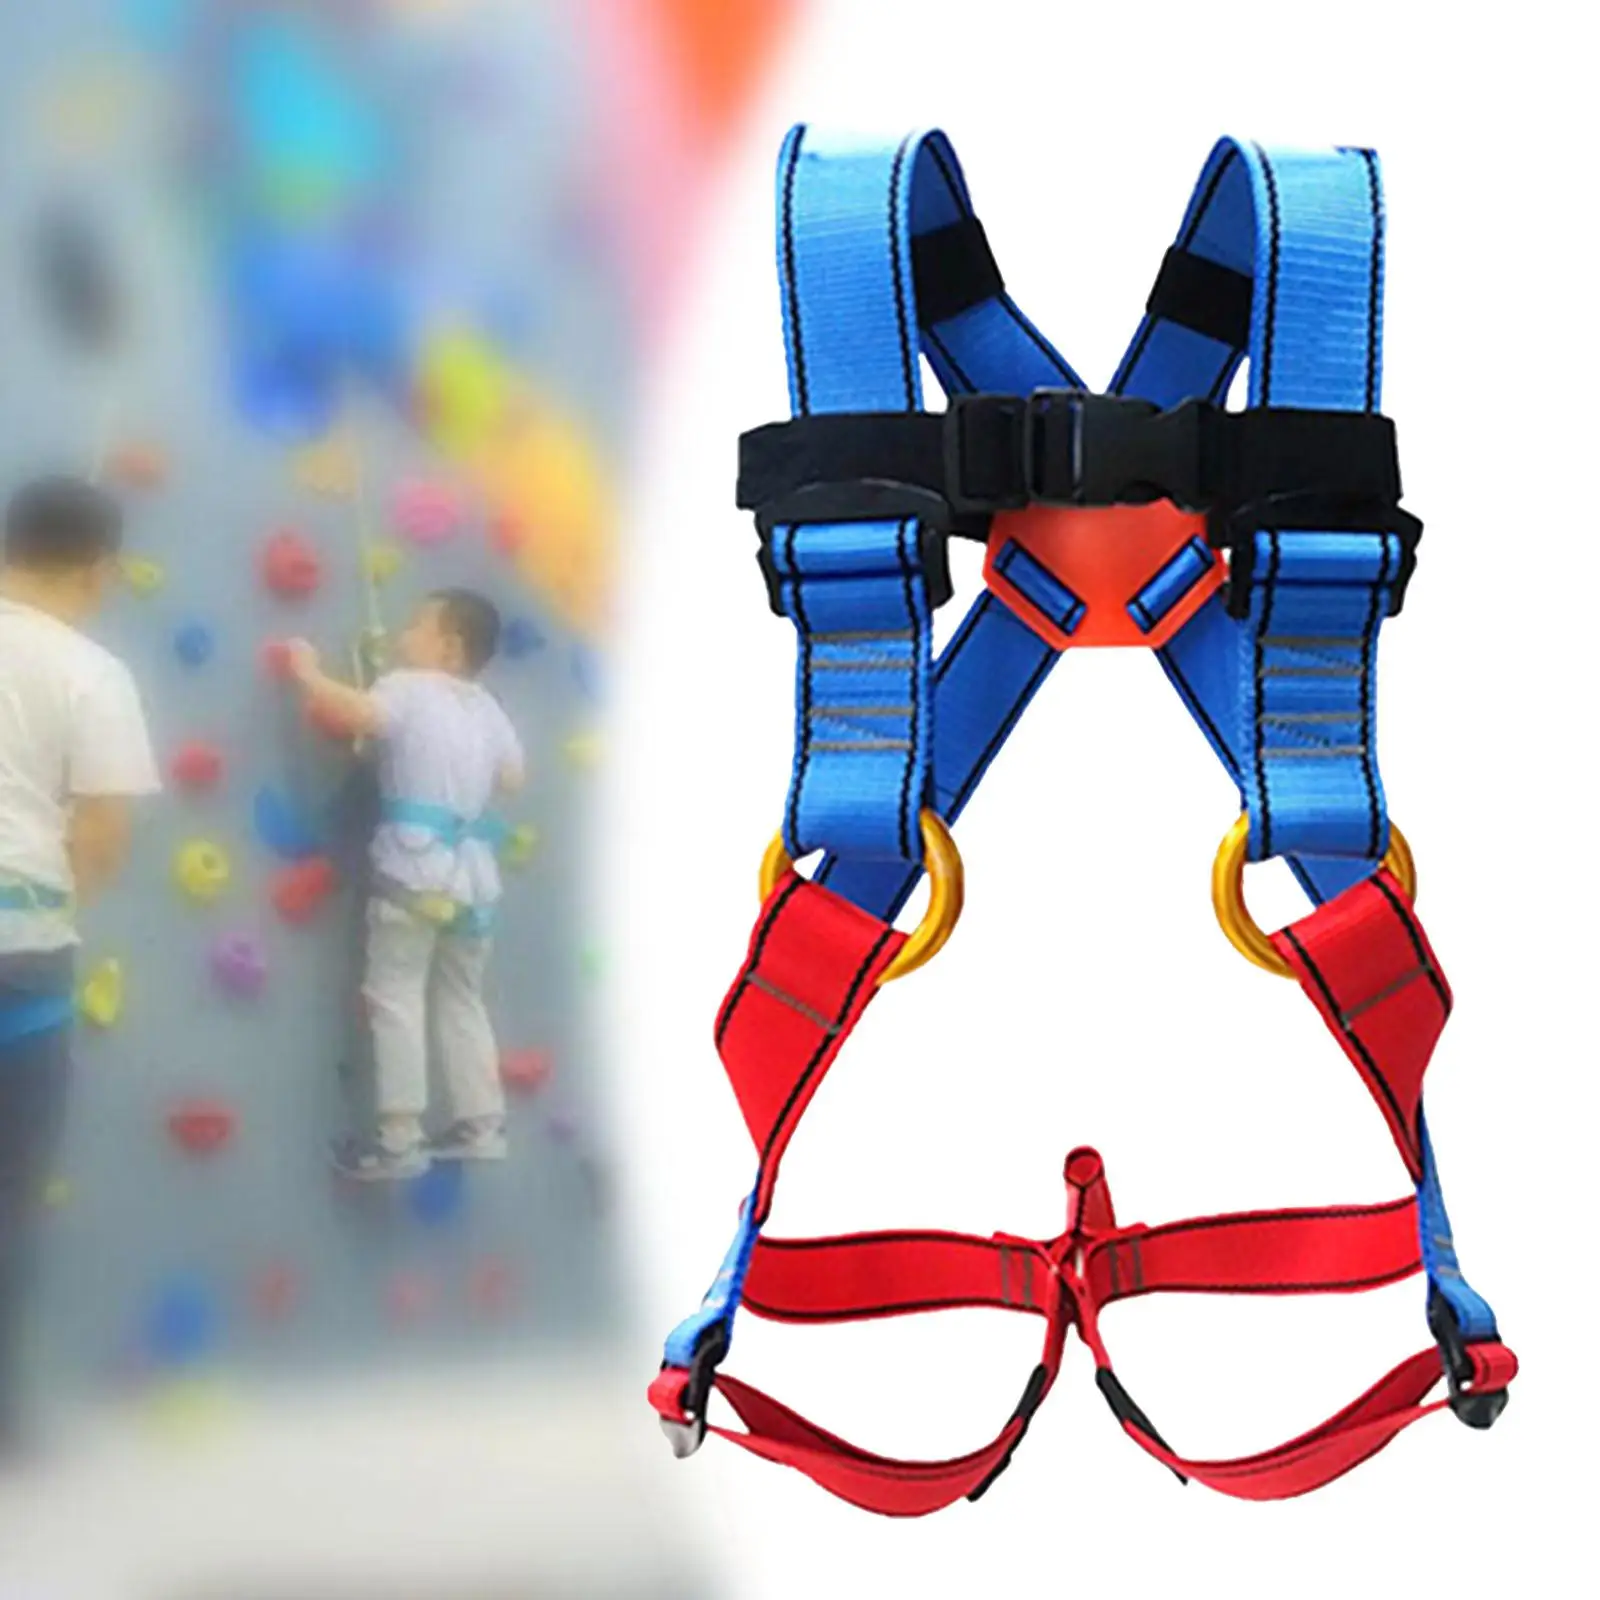 Wider Rock Climbing Harnesses Safety Equipment  Full Body Professional Waist Leg Belts for Caving Arborist Tree Outdoor  Adults